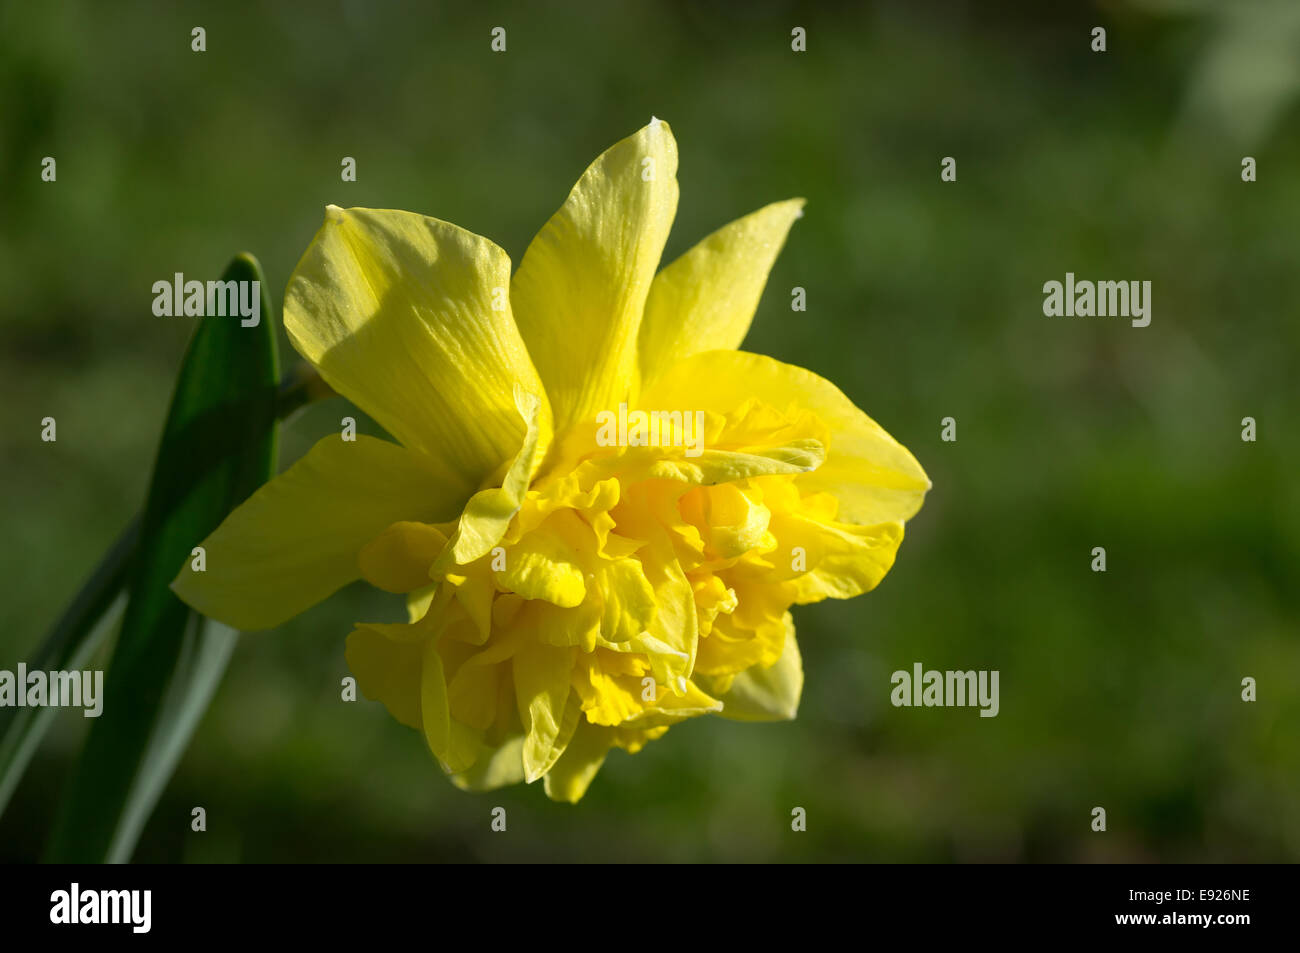 Blooming narcissus species Stock Photo - Alamy